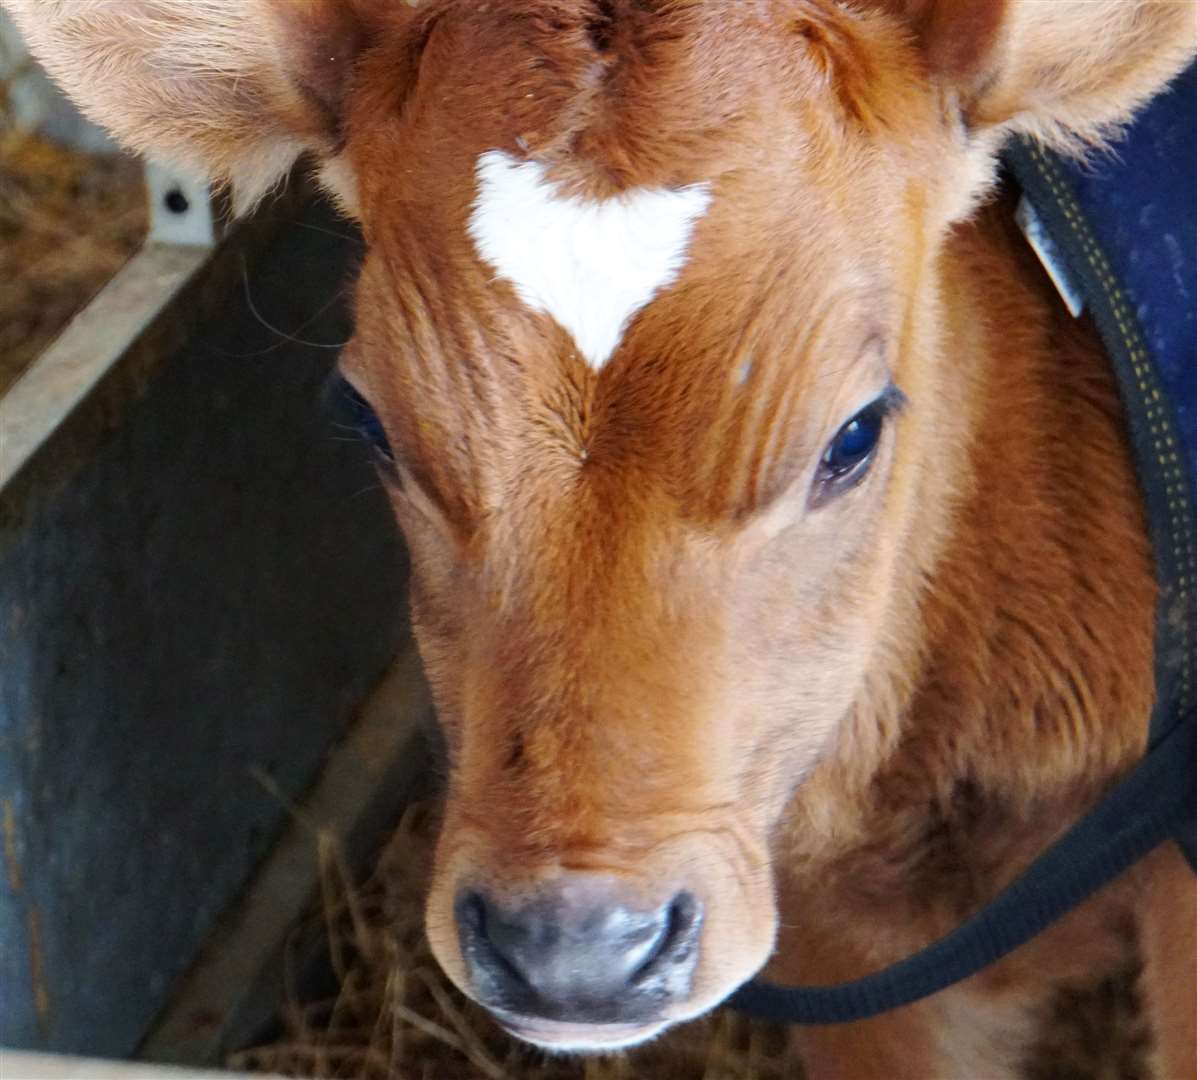 Lorna the Jersey calf has a heart-shaped mark on her forehead. She is one of a set of twins born at Thrumster Mains farm along with her brother Marryot.